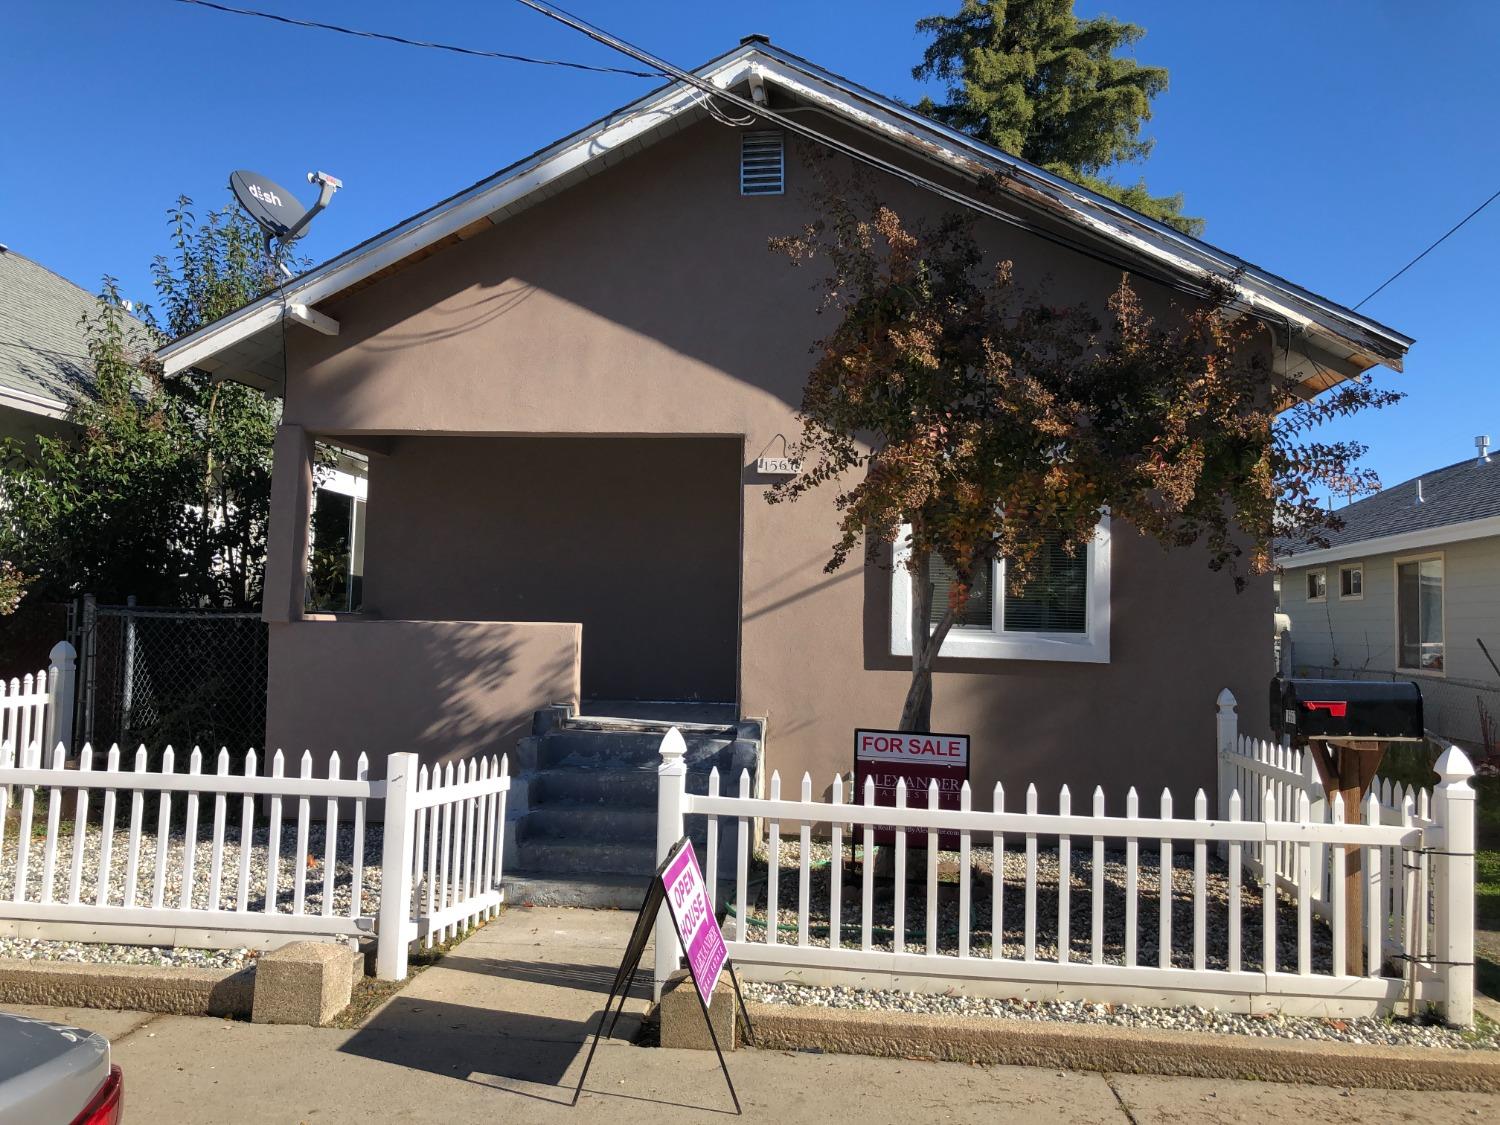 Photo of 1567 3rd Ave in Oroville, CA